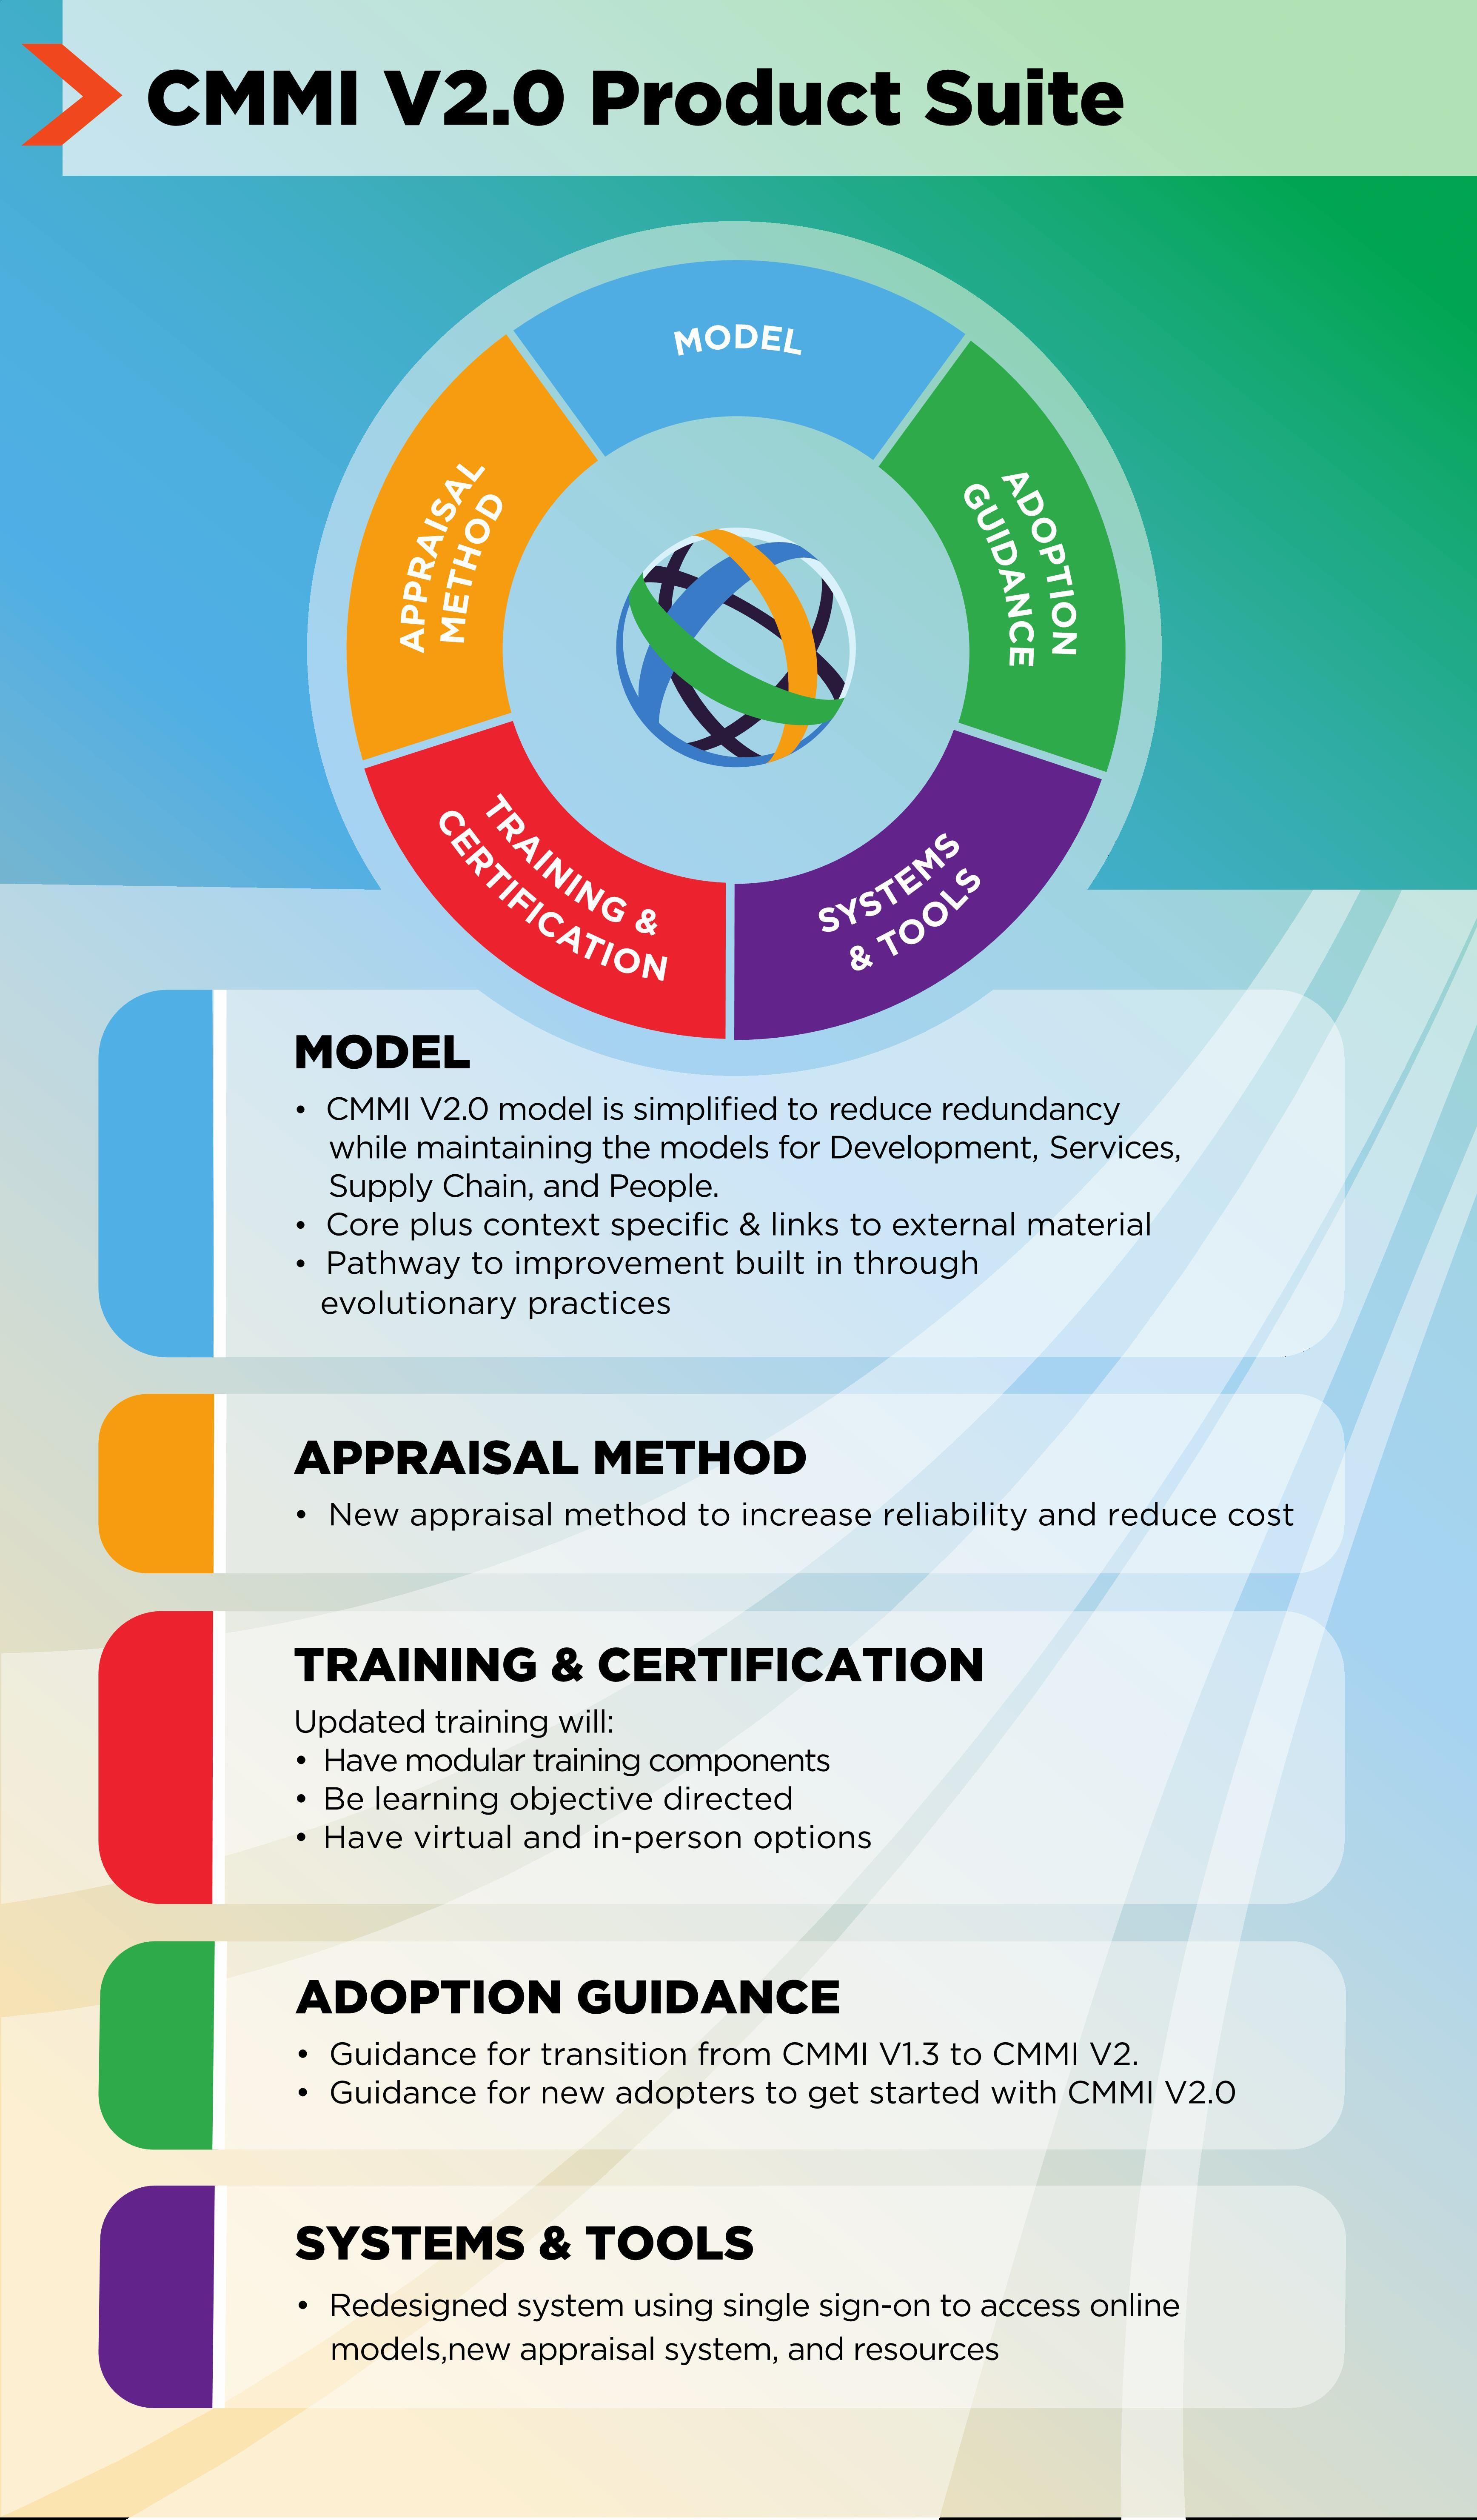 CMMI Logo - What is CMMI V2.0? – CMMI Institute Help Center